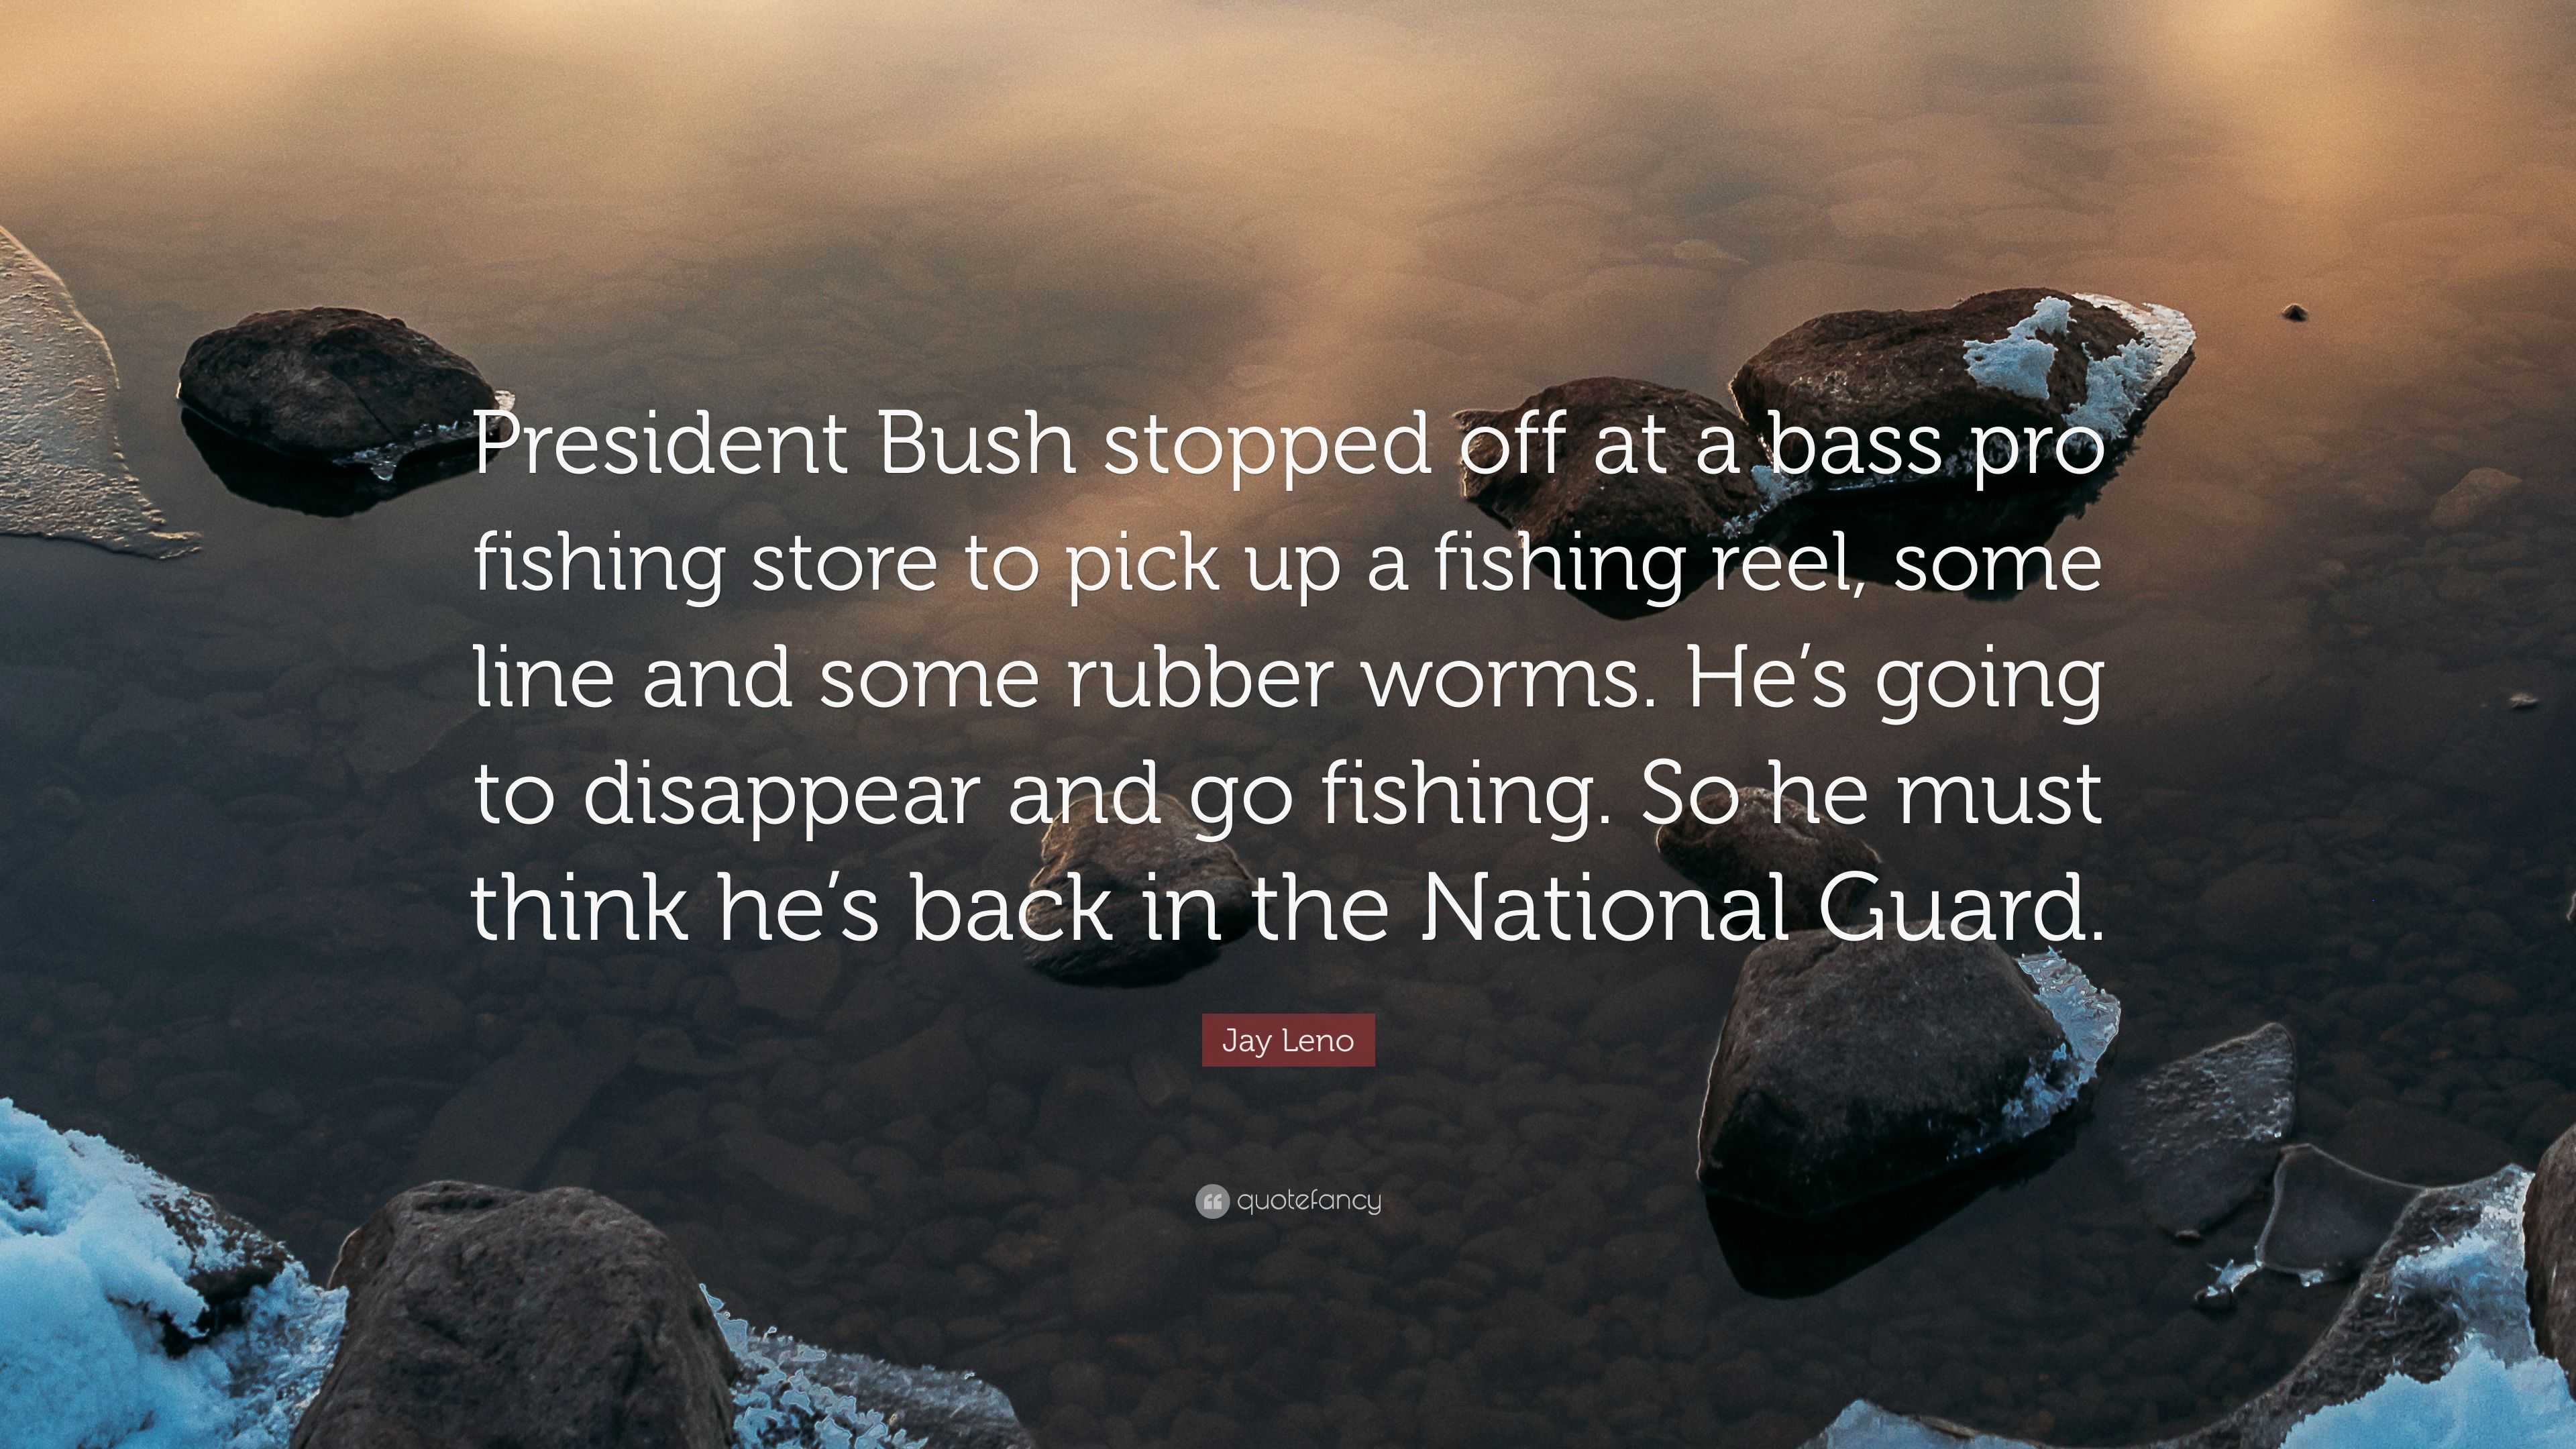 Jay Leno Quote: “President Bush stopped off at a bass pro fishing store to  pick up a fishing reel, some line and some rubber worms. He's ”